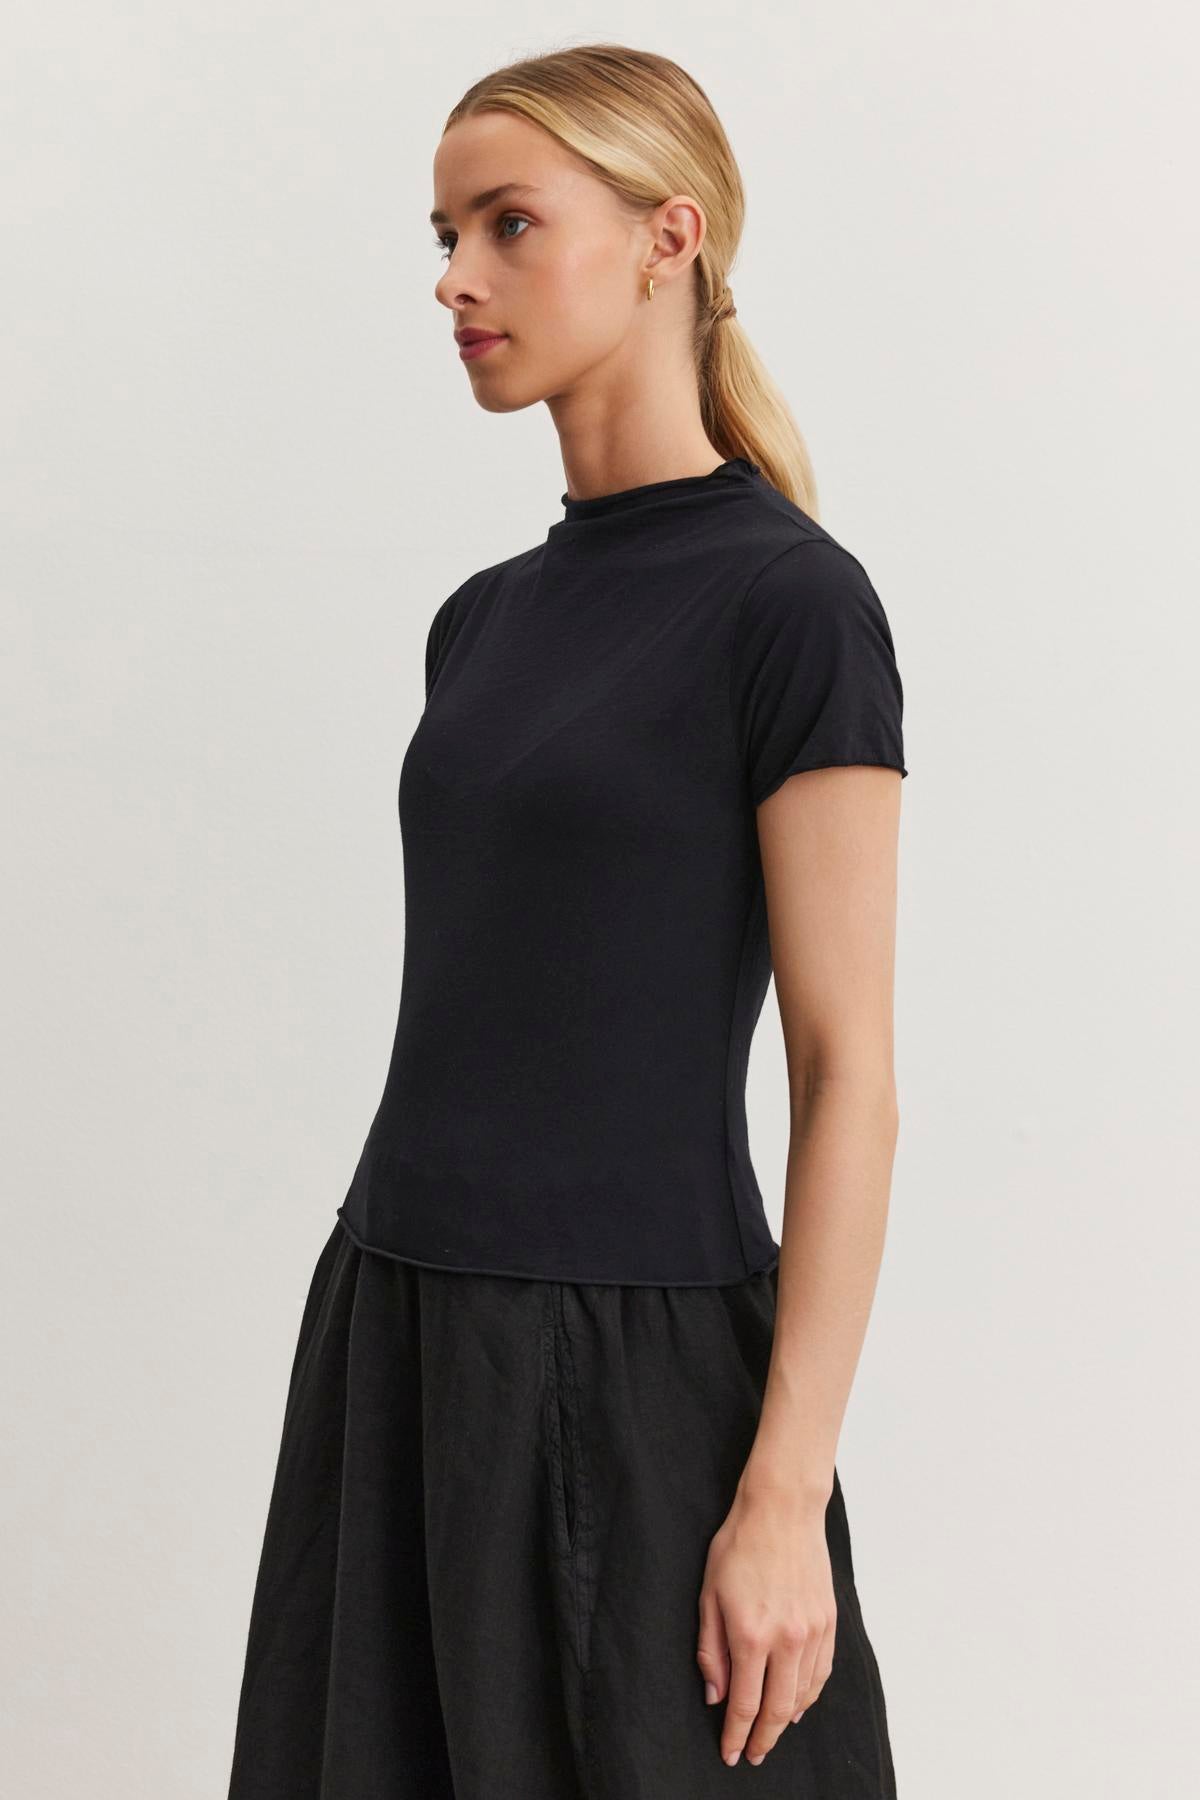 A woman with blonde hair tied back in a ponytail is wearing a black JACKIE MOCK NECK TEE by Velvet by Graham & Spencer and a matching black skirt, both showcasing a fitted cropped silhouette, standing against a plain white background.-37104257827009